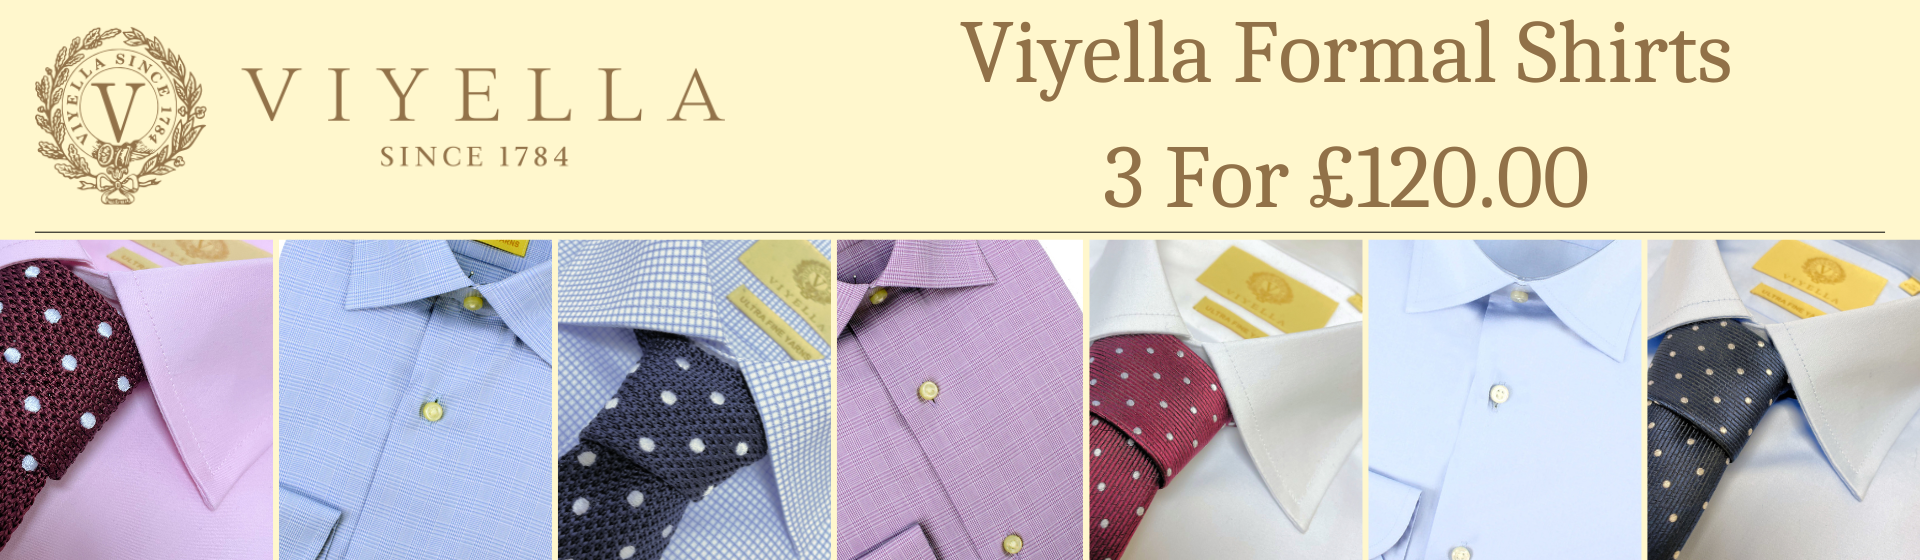 3 Formal Shirts For £120